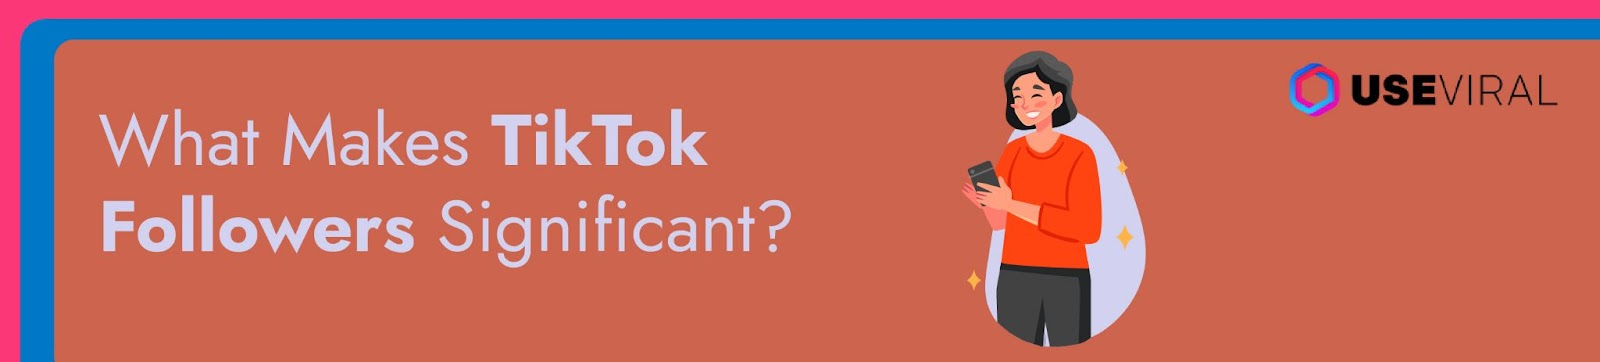 What Makes TikTok Followers Significant?